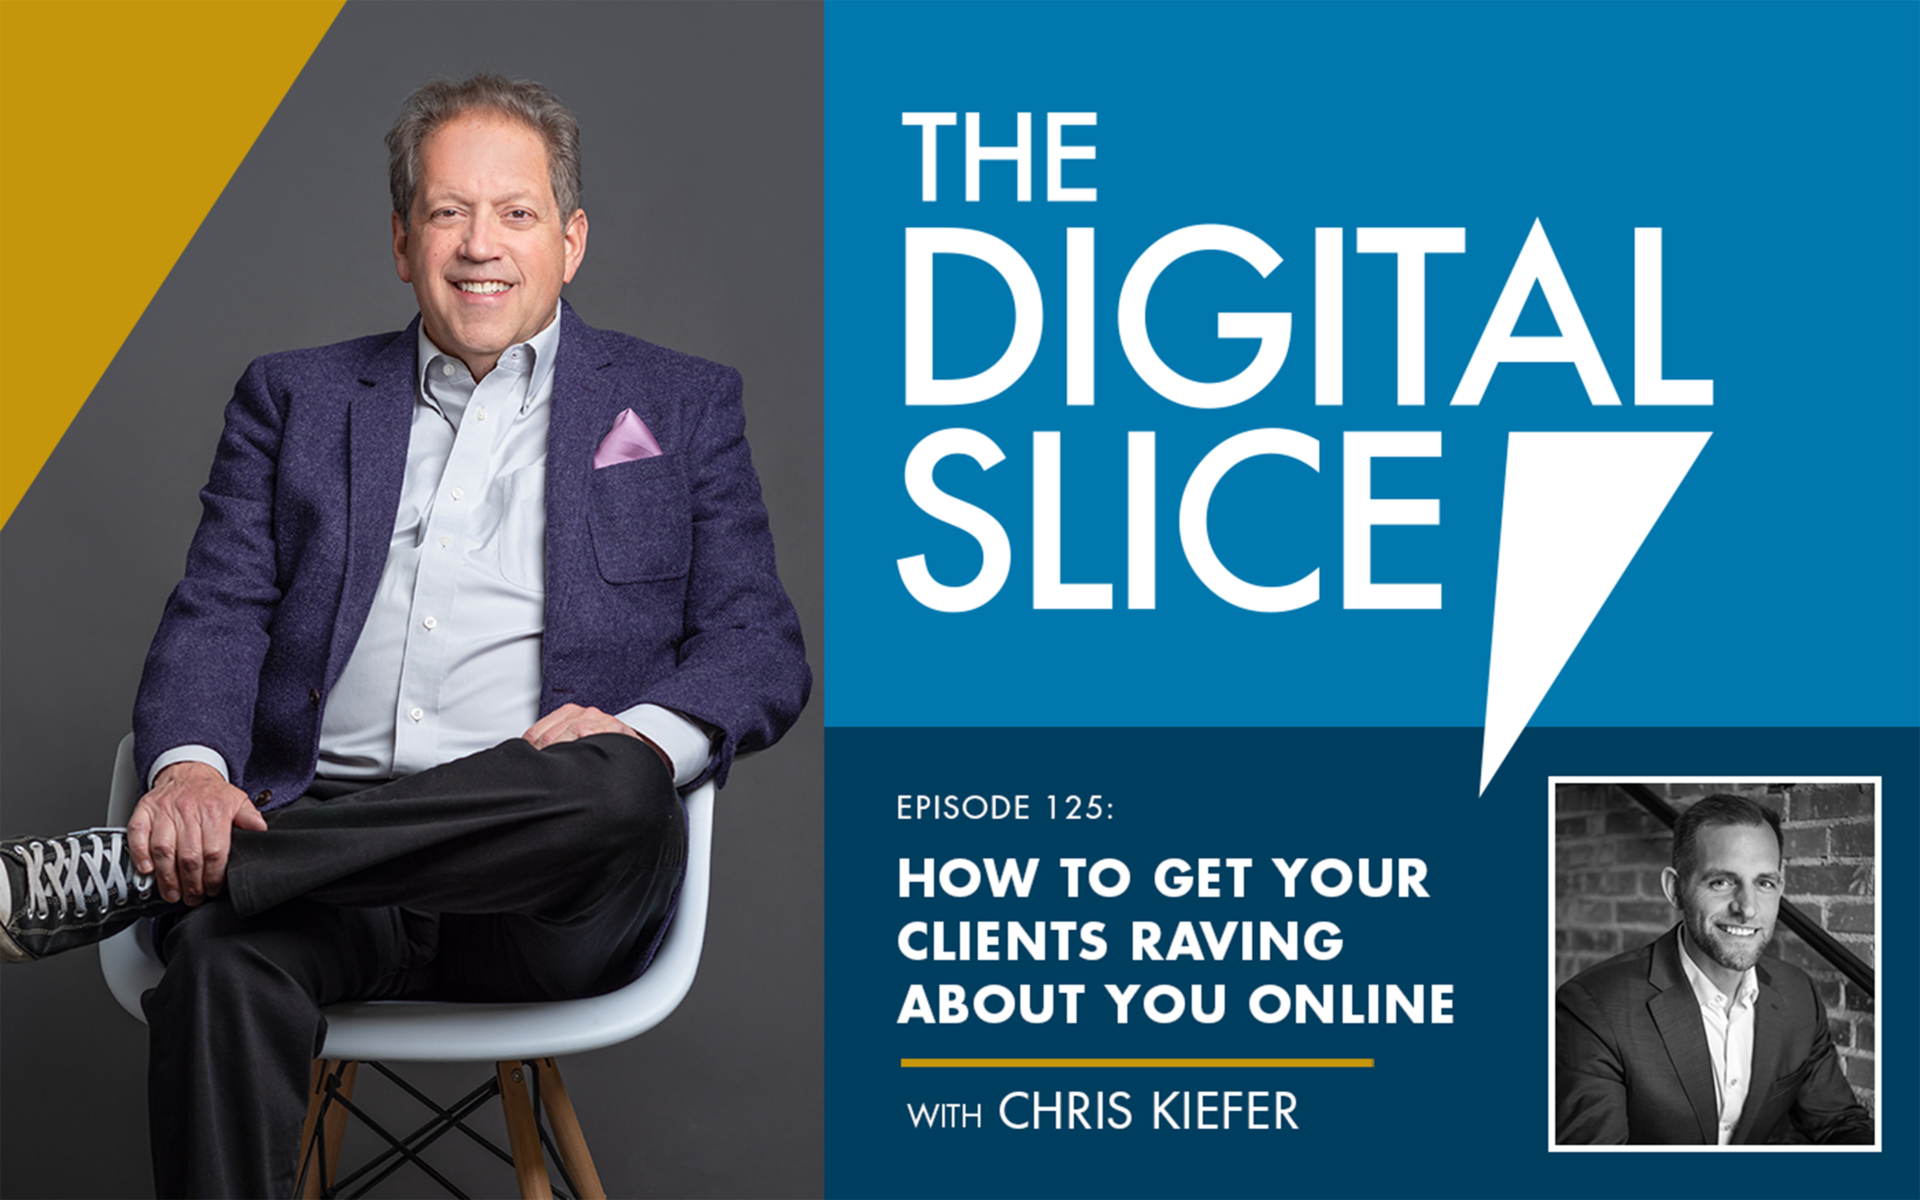 [PODCAST] How To Get Your Clients Raving About You Online